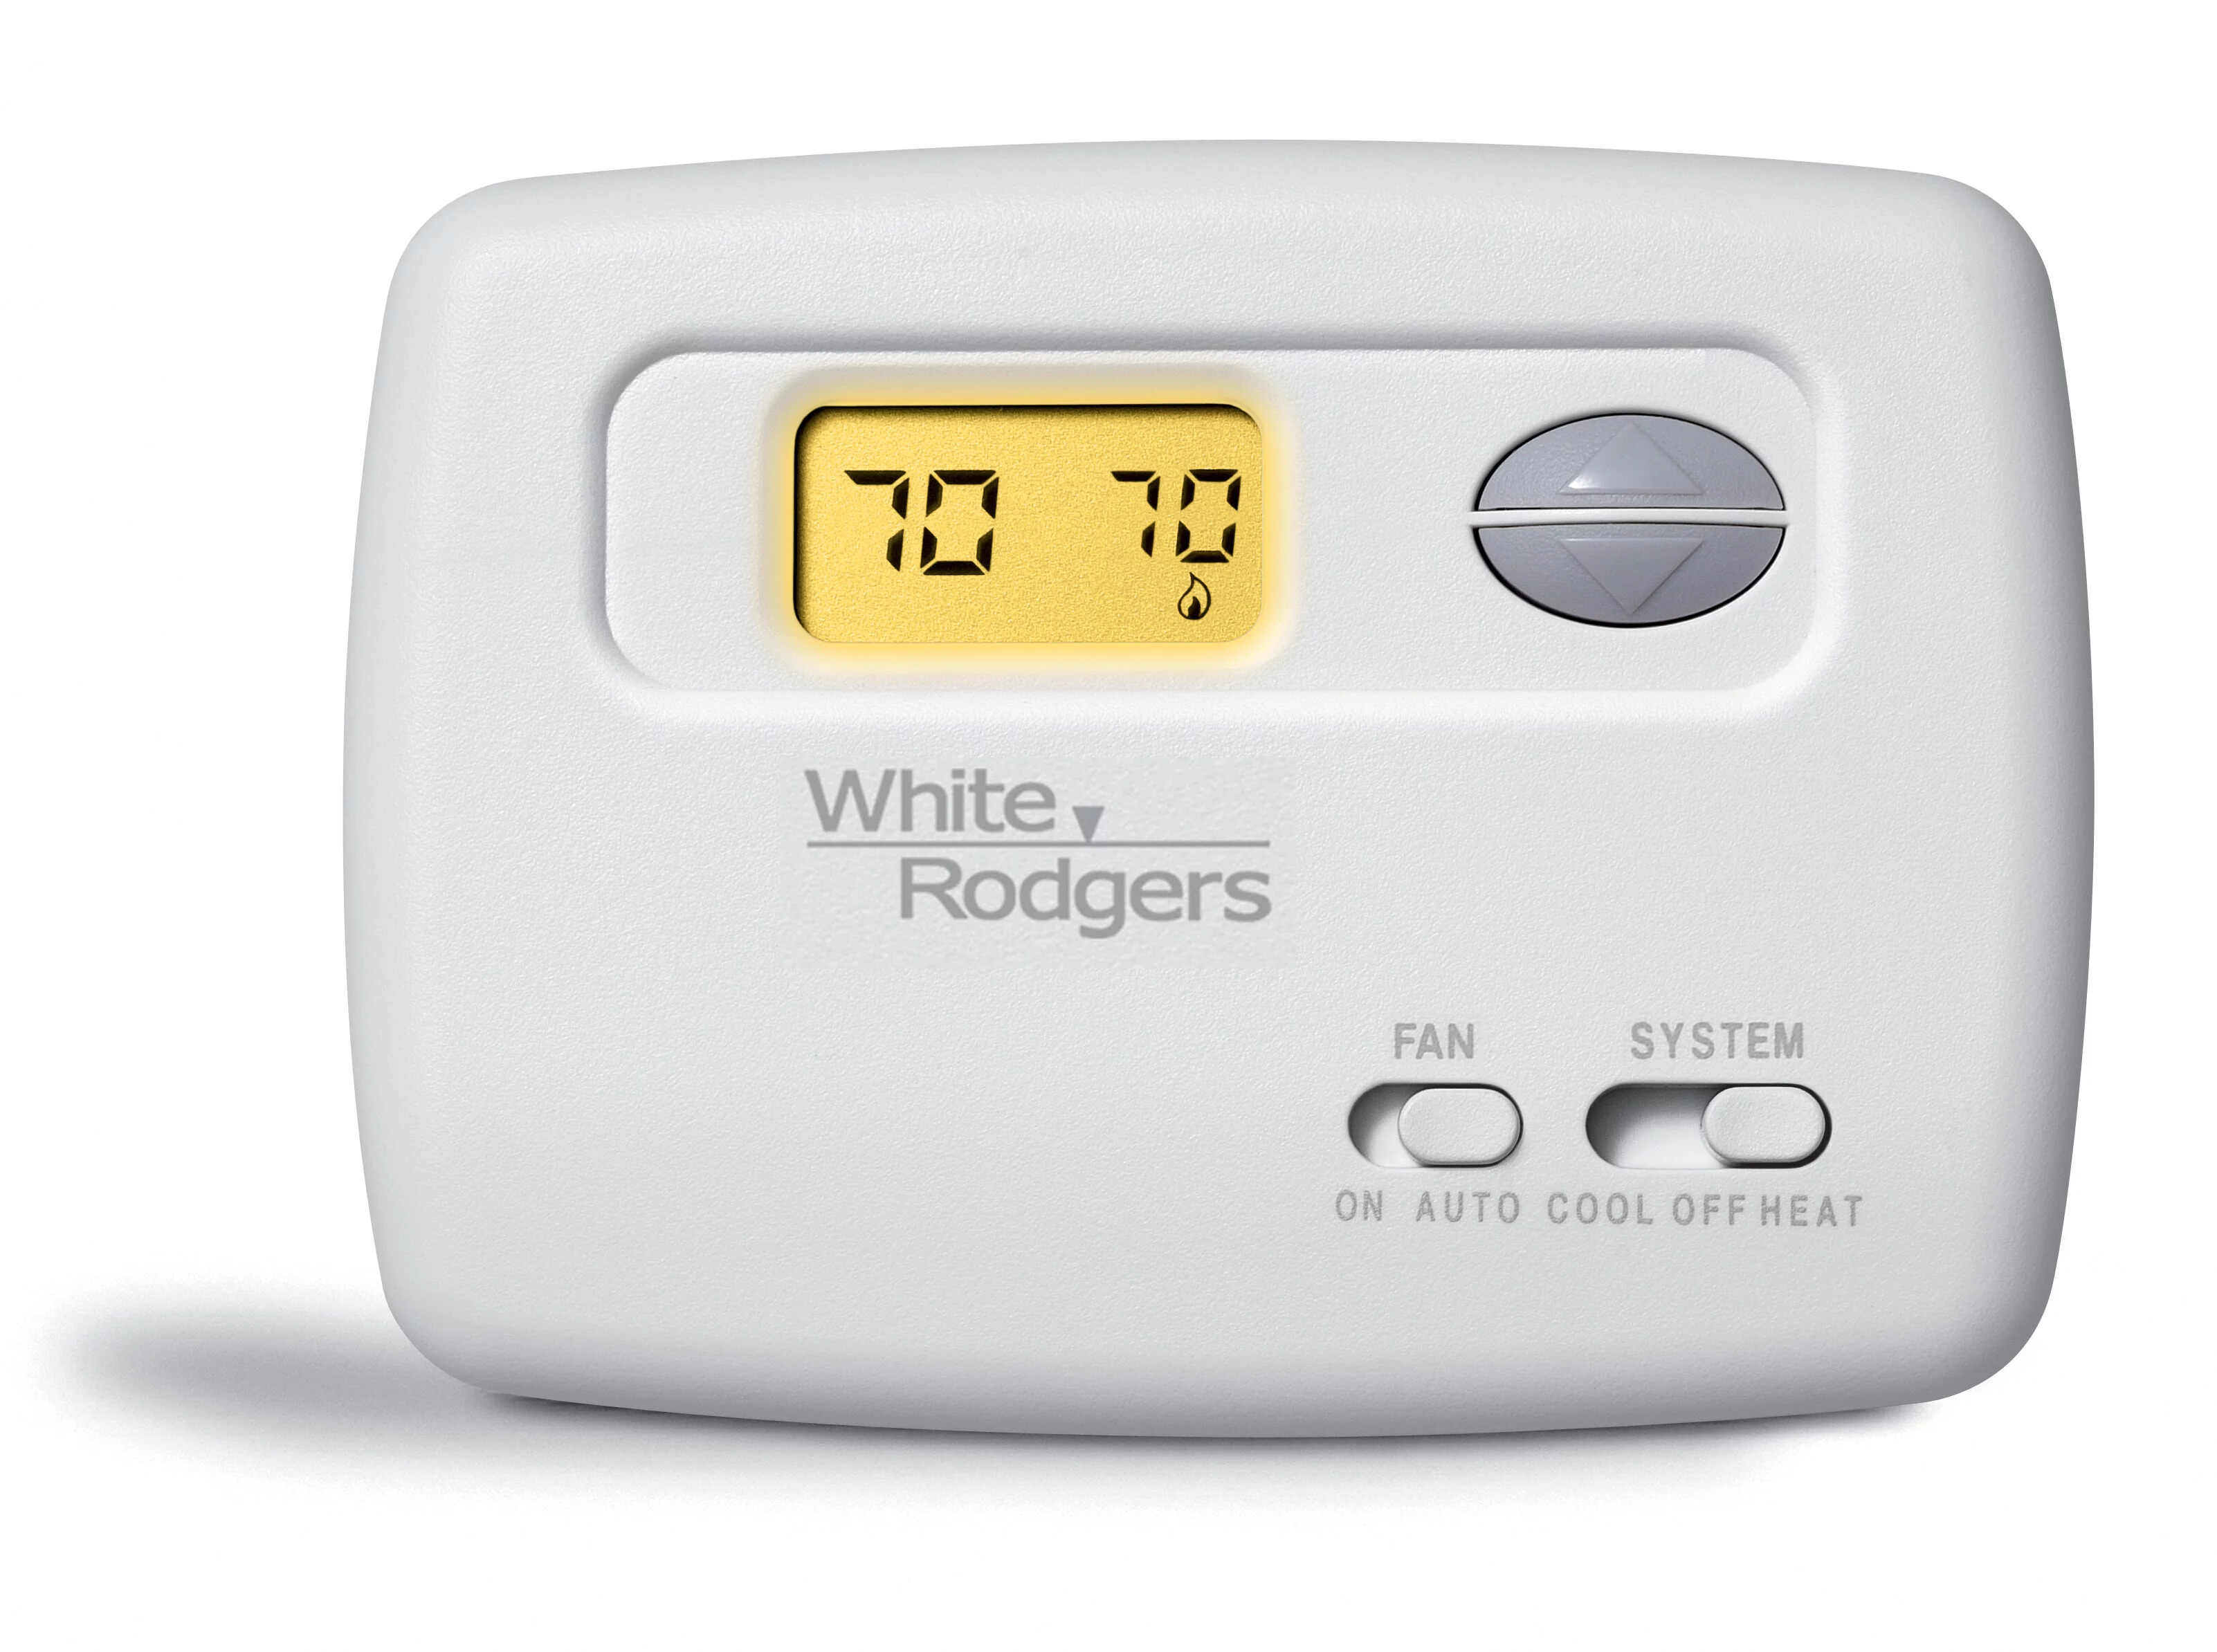 How To Replace White Rodgers Thermostat Battery